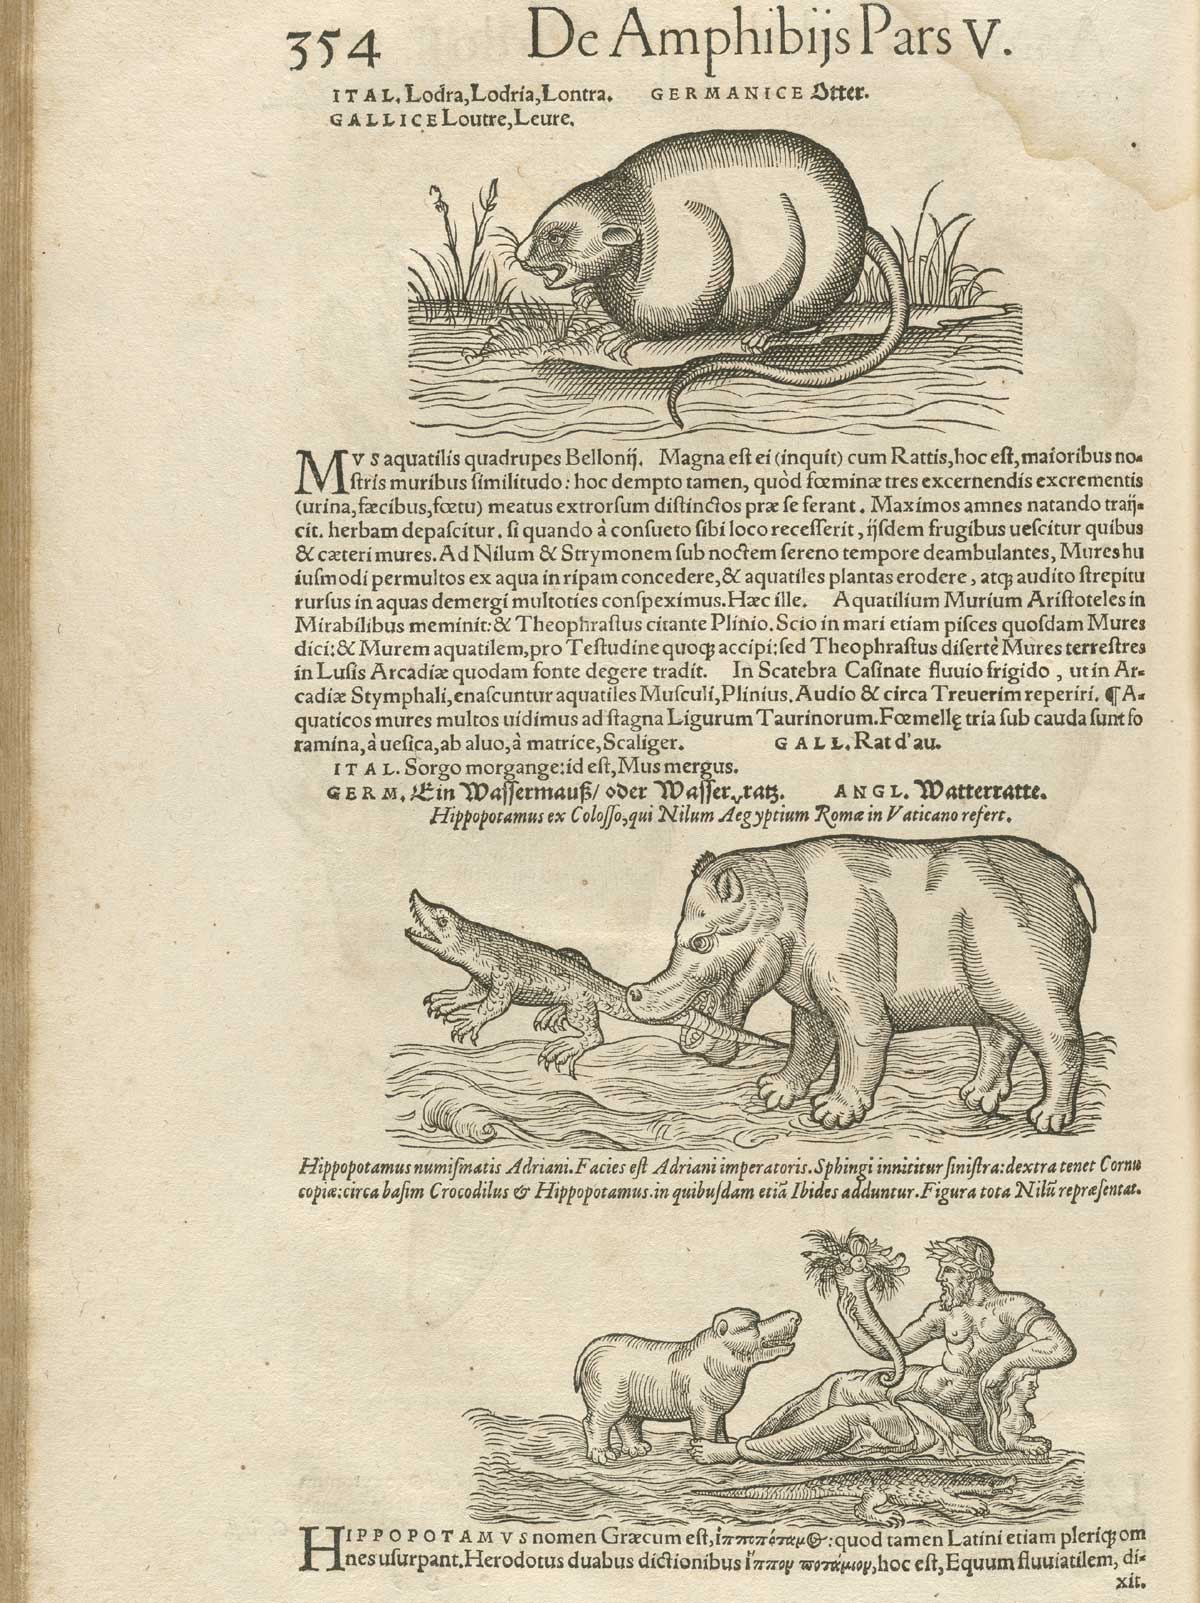 Page 354 from volume 4 of Conrad Gessner's Conradi Gesneri medici Tigurini Historiae animalium, featuring the three illustrations. The top illustration is of an otter, the middle illustration is a hippopotamus biting a crocodile by its tail, and the bottom illustration is a hippopotamus standing at the feet of a reclining man holding a cornucopia in his right hand.